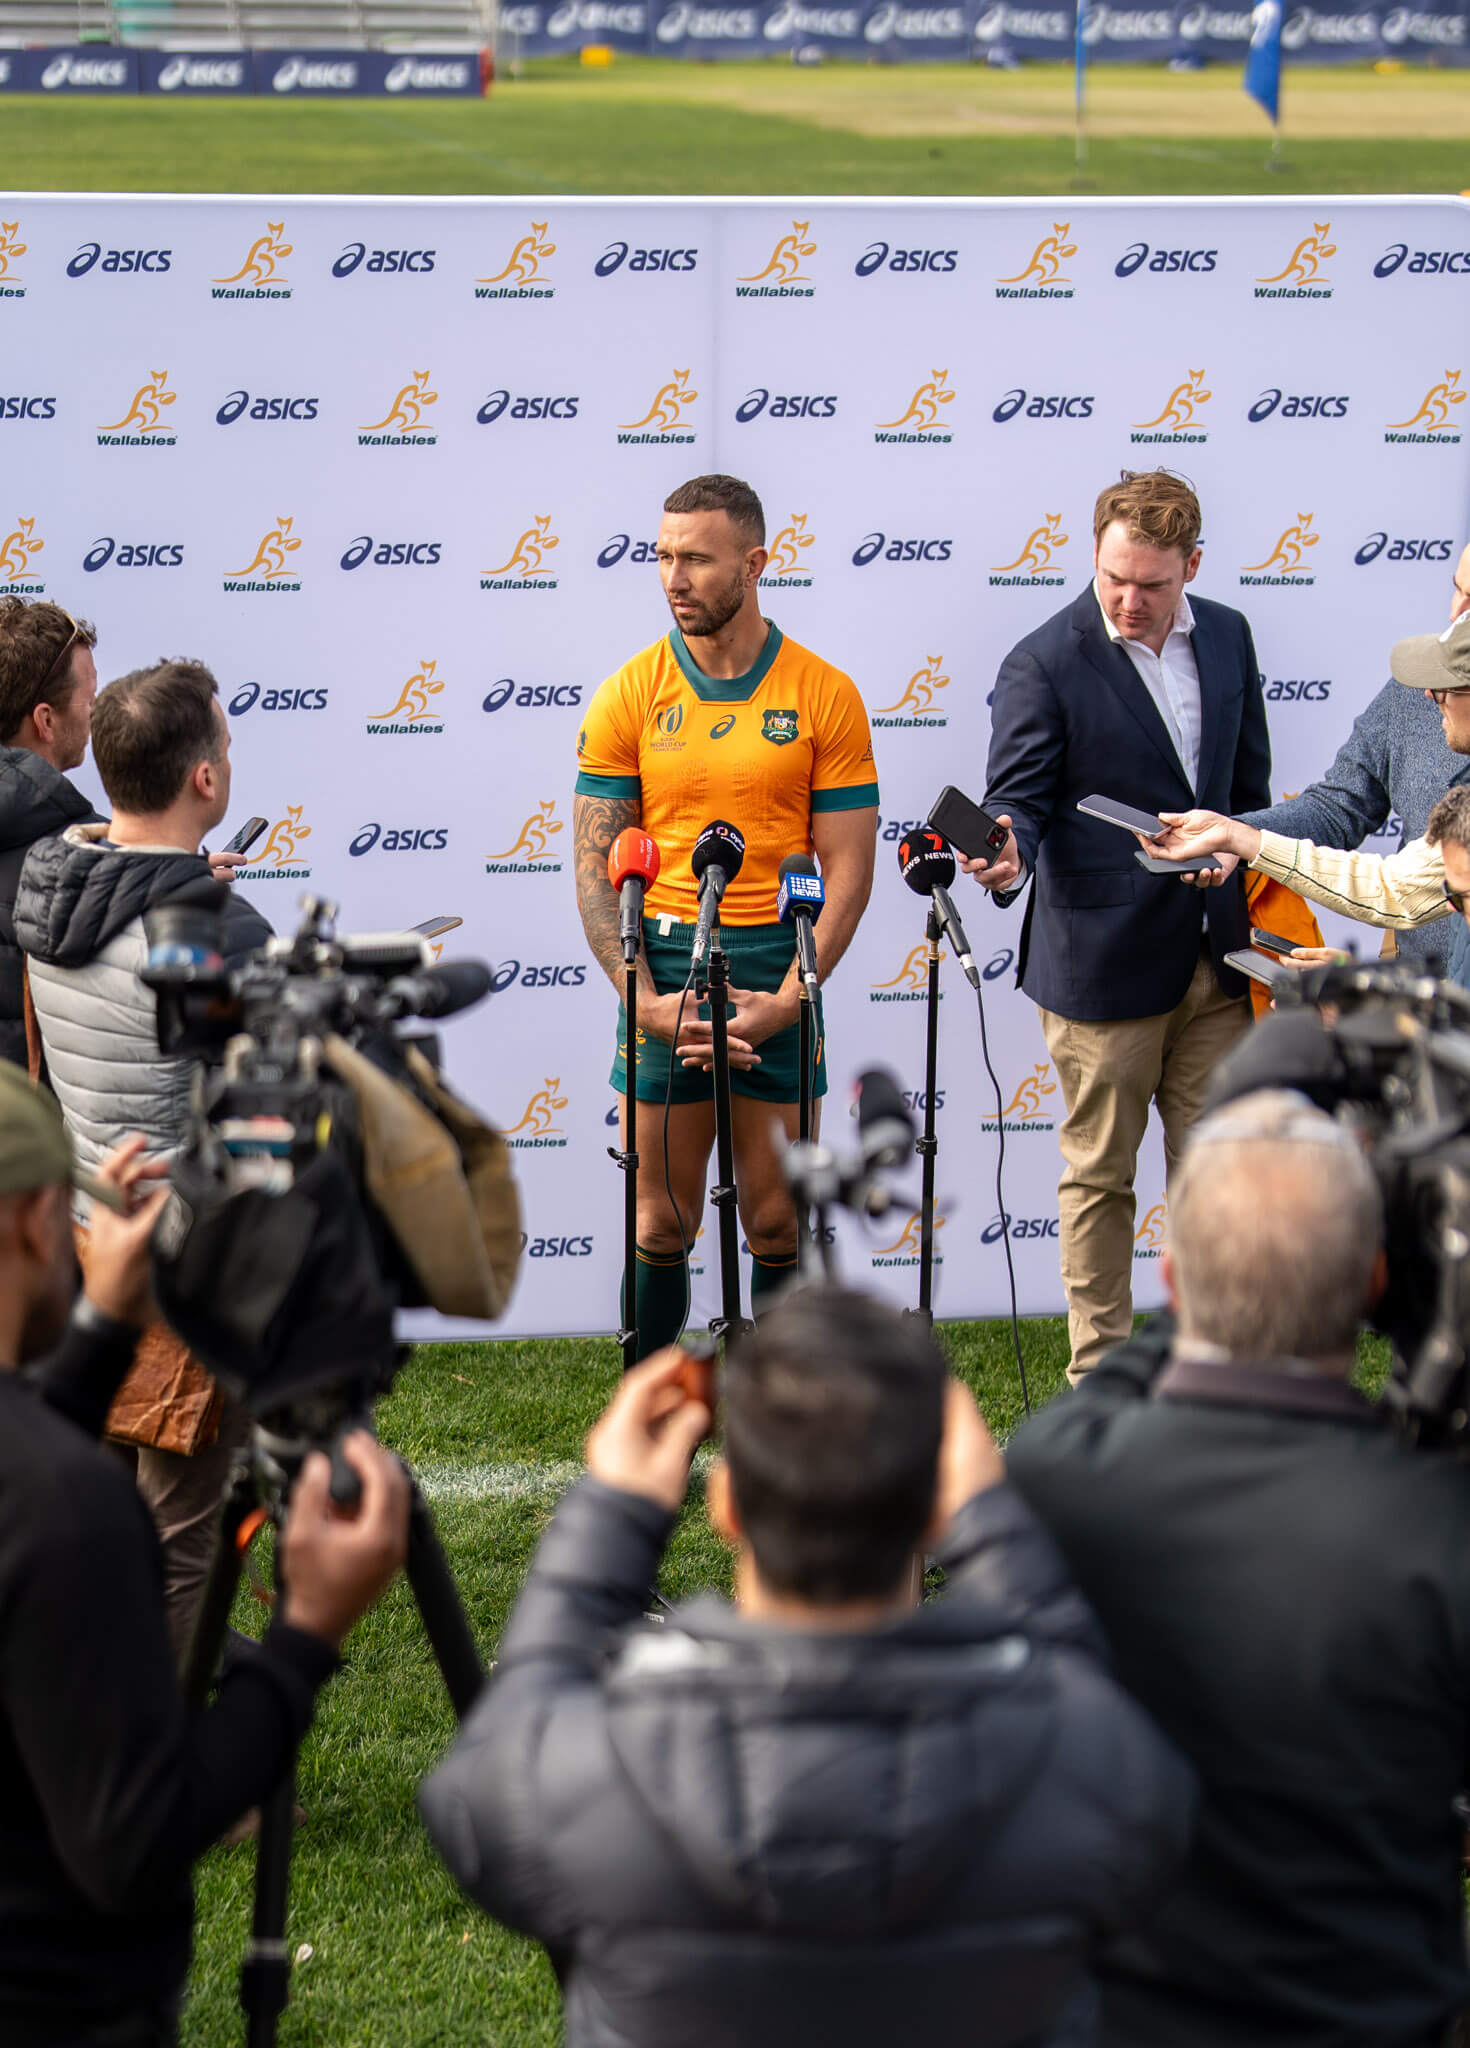 Wallabies player Quade Cooper interviewed in front of media.